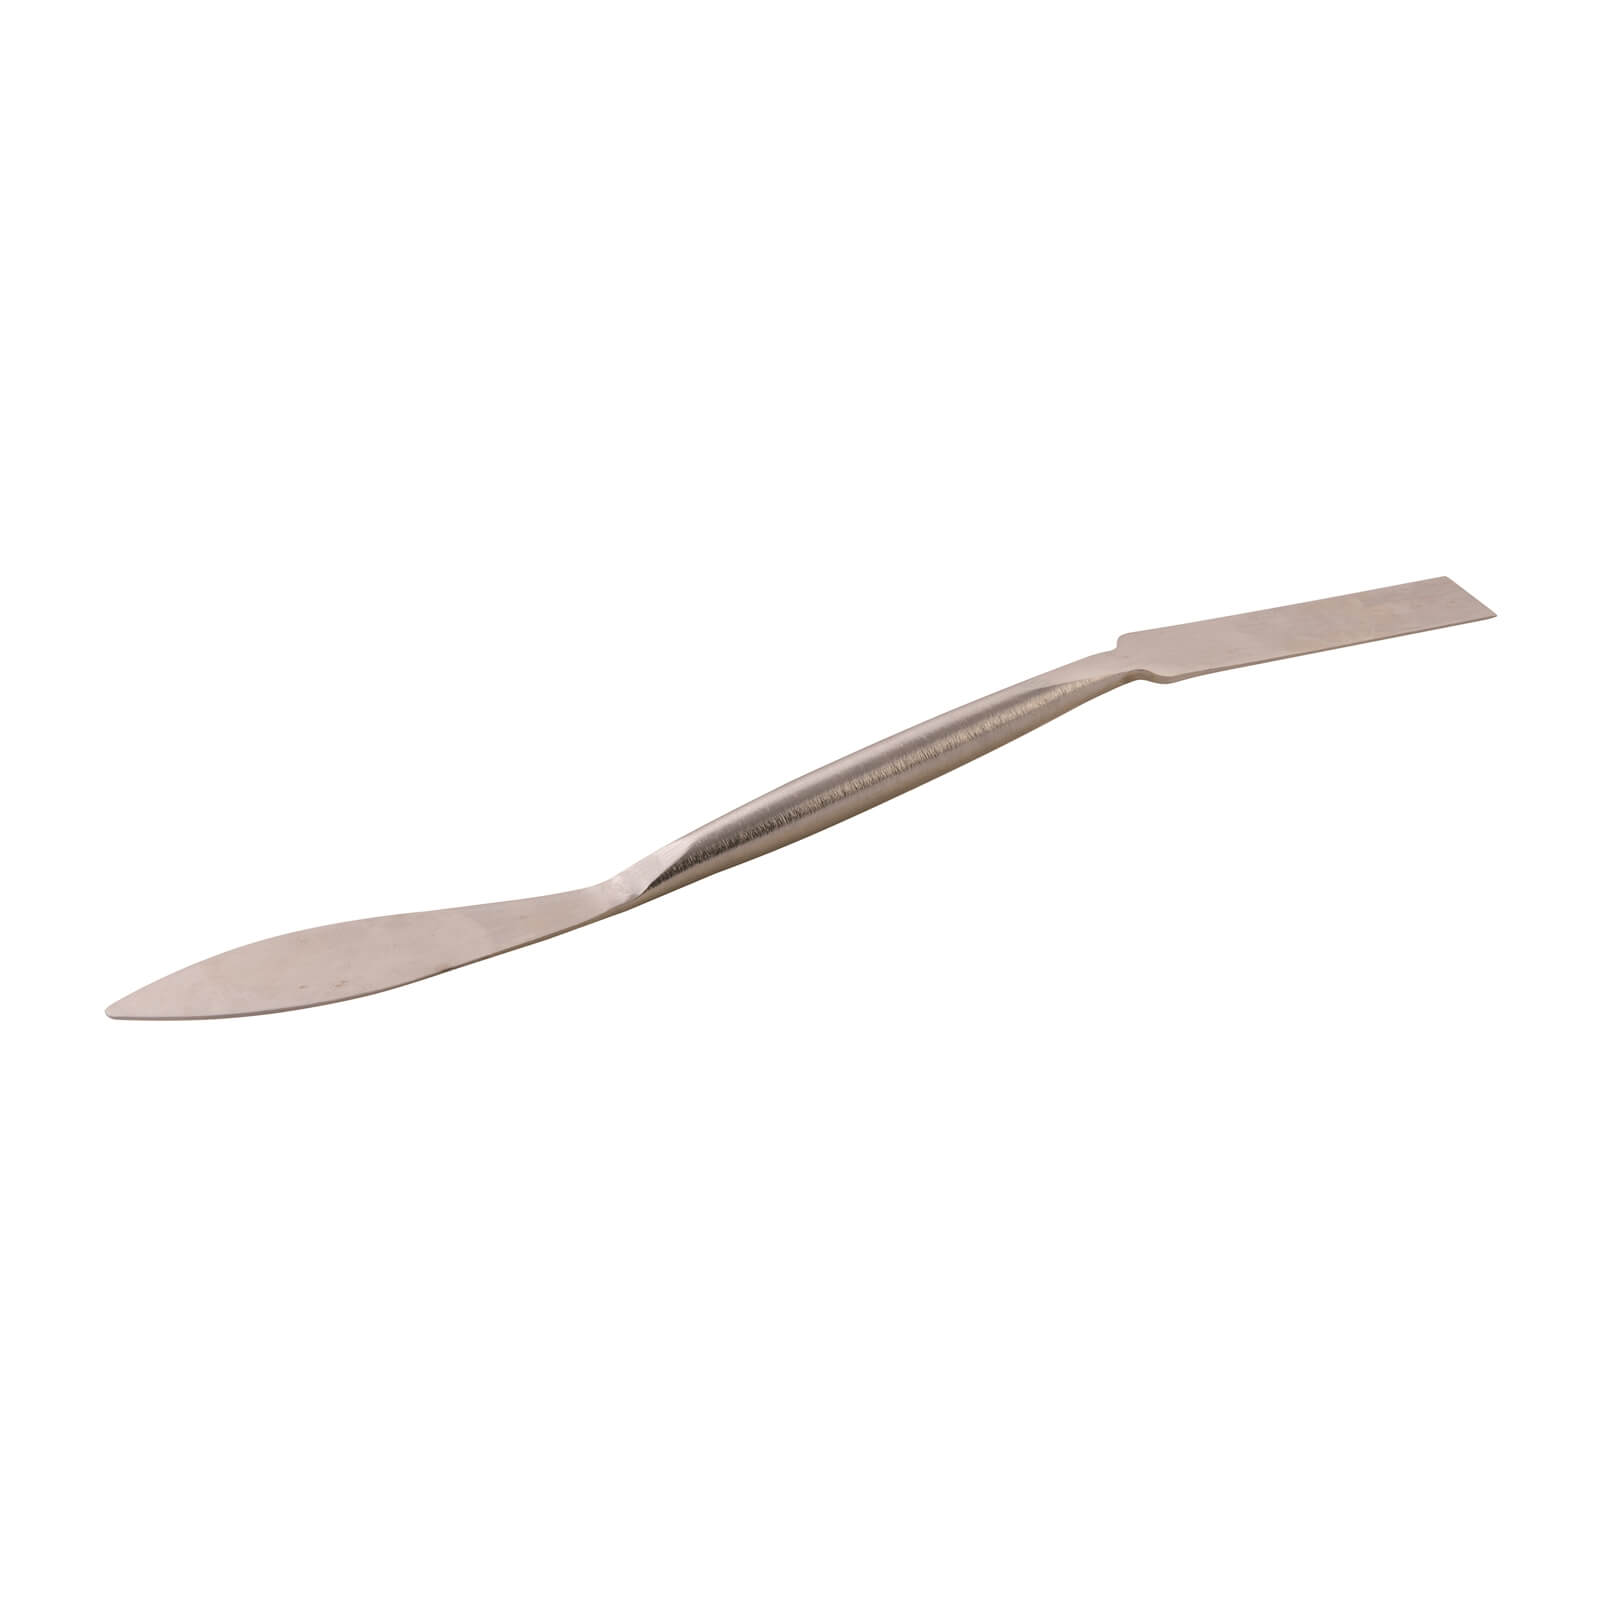 Photo of Silverline Plasterers Leaf & Square Tool - 230mm